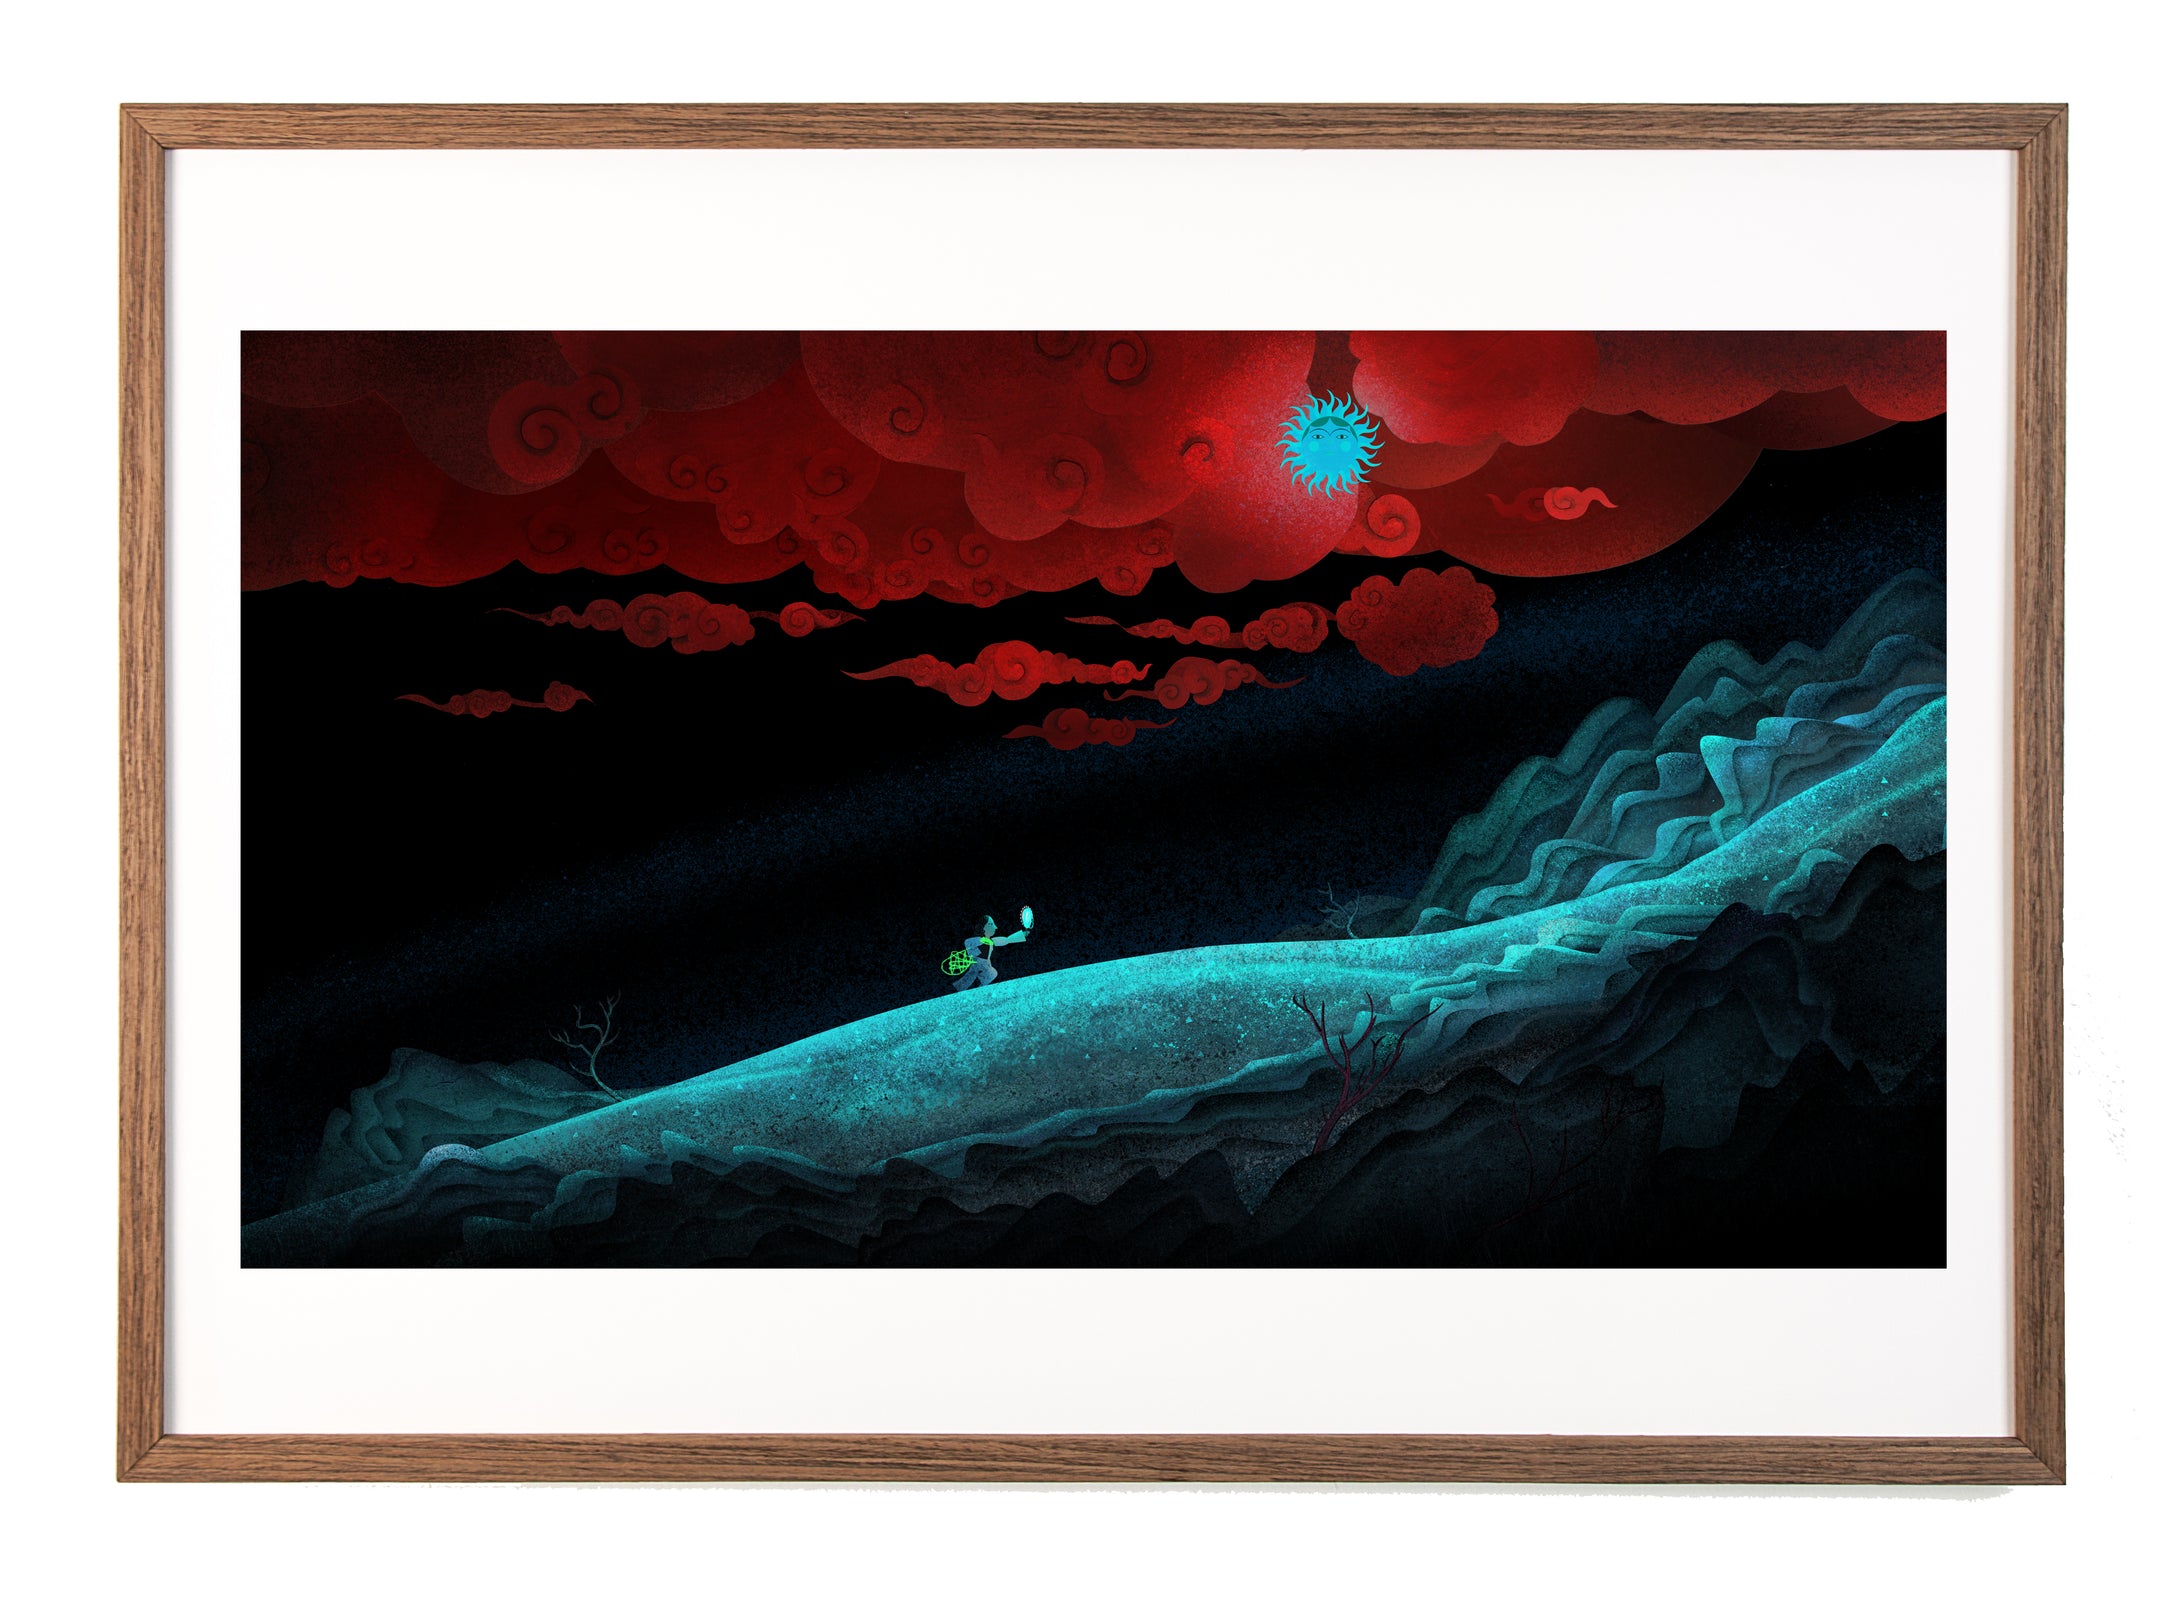 Sulayman and the mountain - Limited Edition Signed Print - Framed